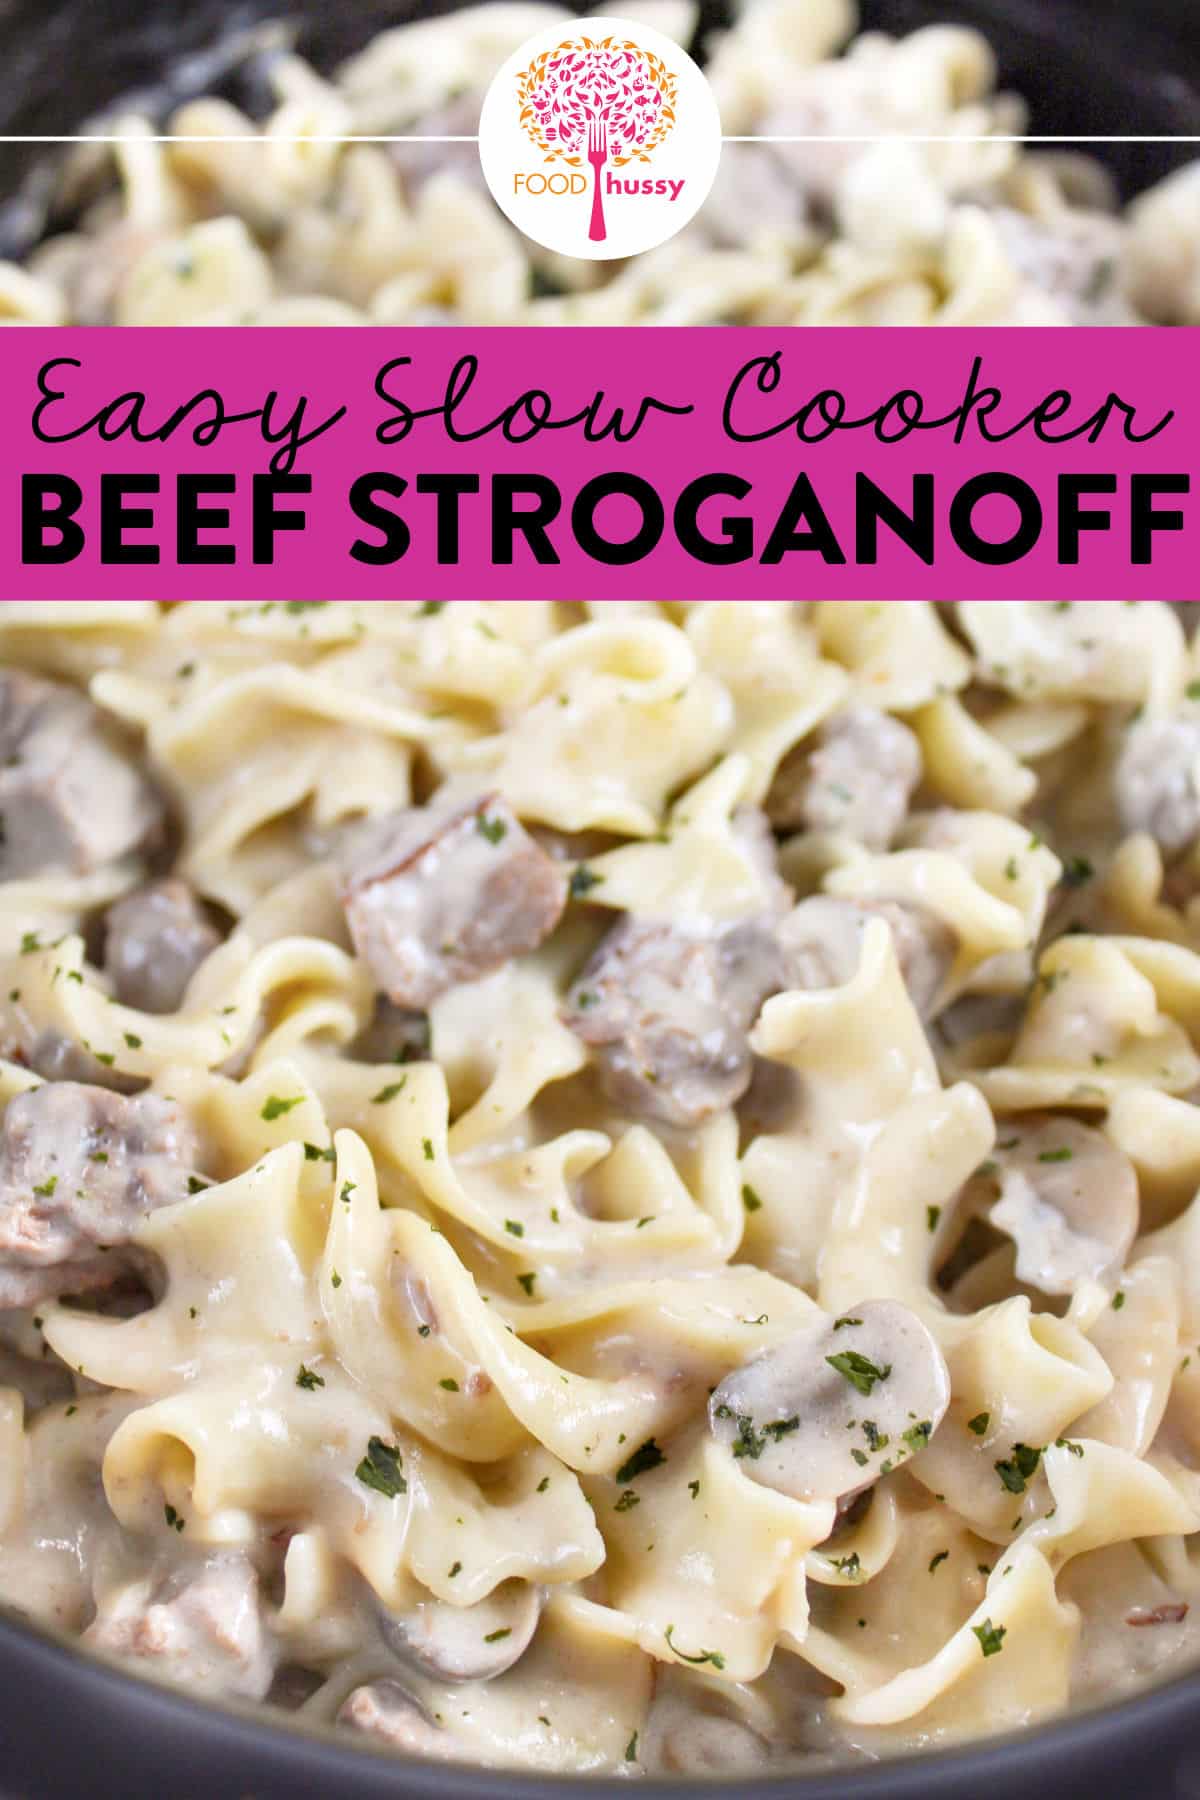 This 5 Ingredient Crock Pot Beef Stroganoff combines tender beef chunks, sliced mushrooms and a rich sour cream sauce to make a simple and delicious dinner! Serve over egg noodles or rice and enjoy!  via @foodhussy